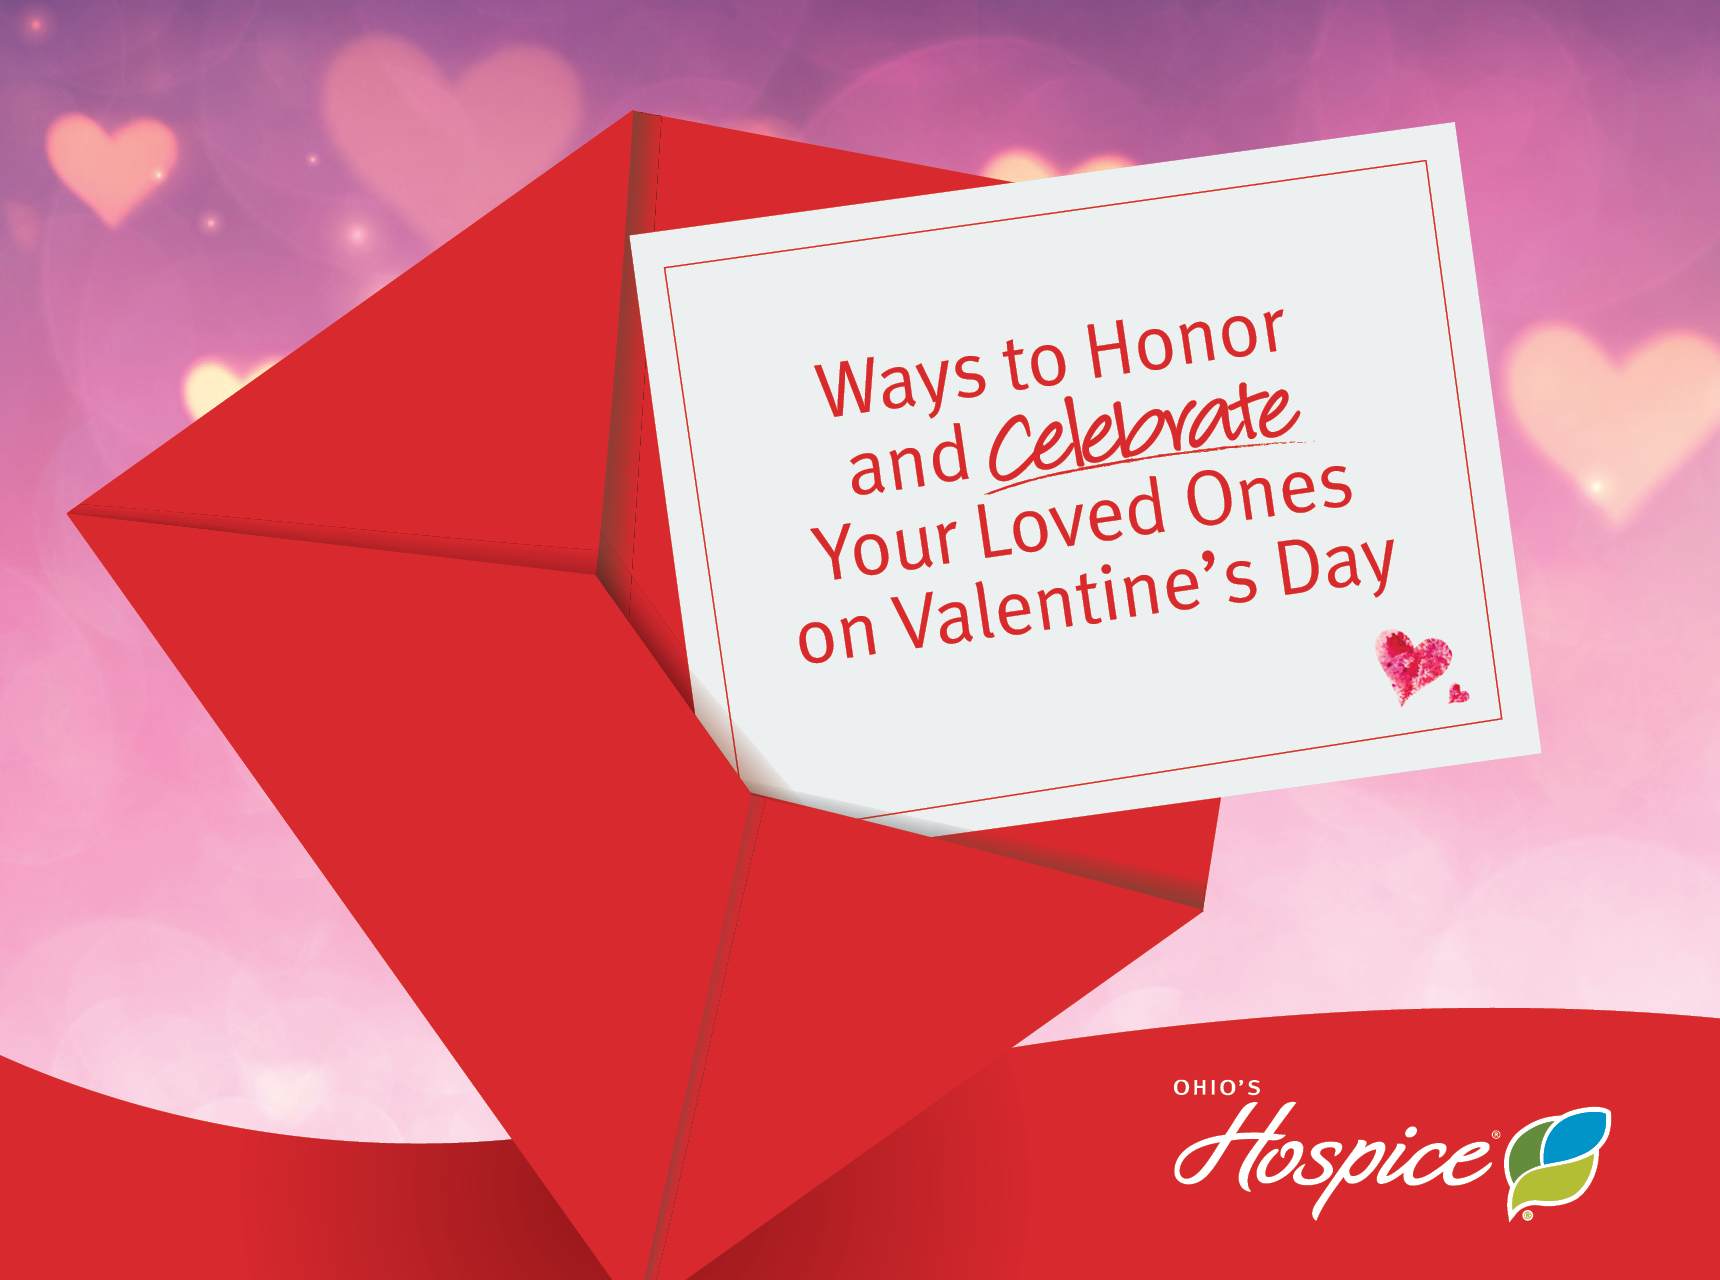 Ways to Honor and Celebrate Your Loved Ones on Valentine's Day